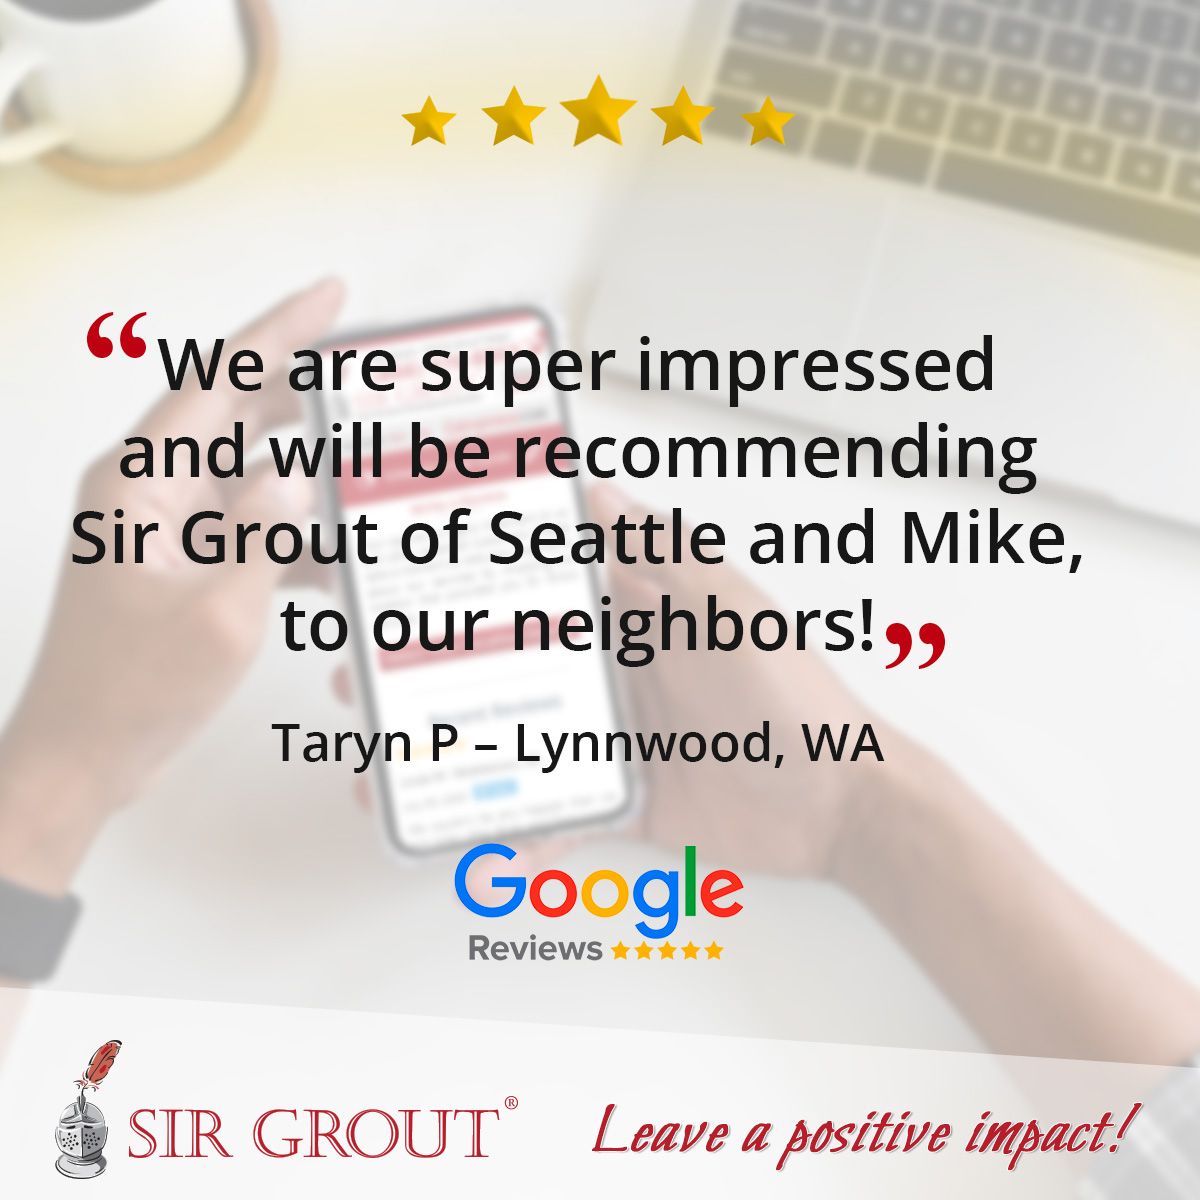 We are super impressed and will be recommending Sir Grout of Seattle and Mike, to our neighbors!